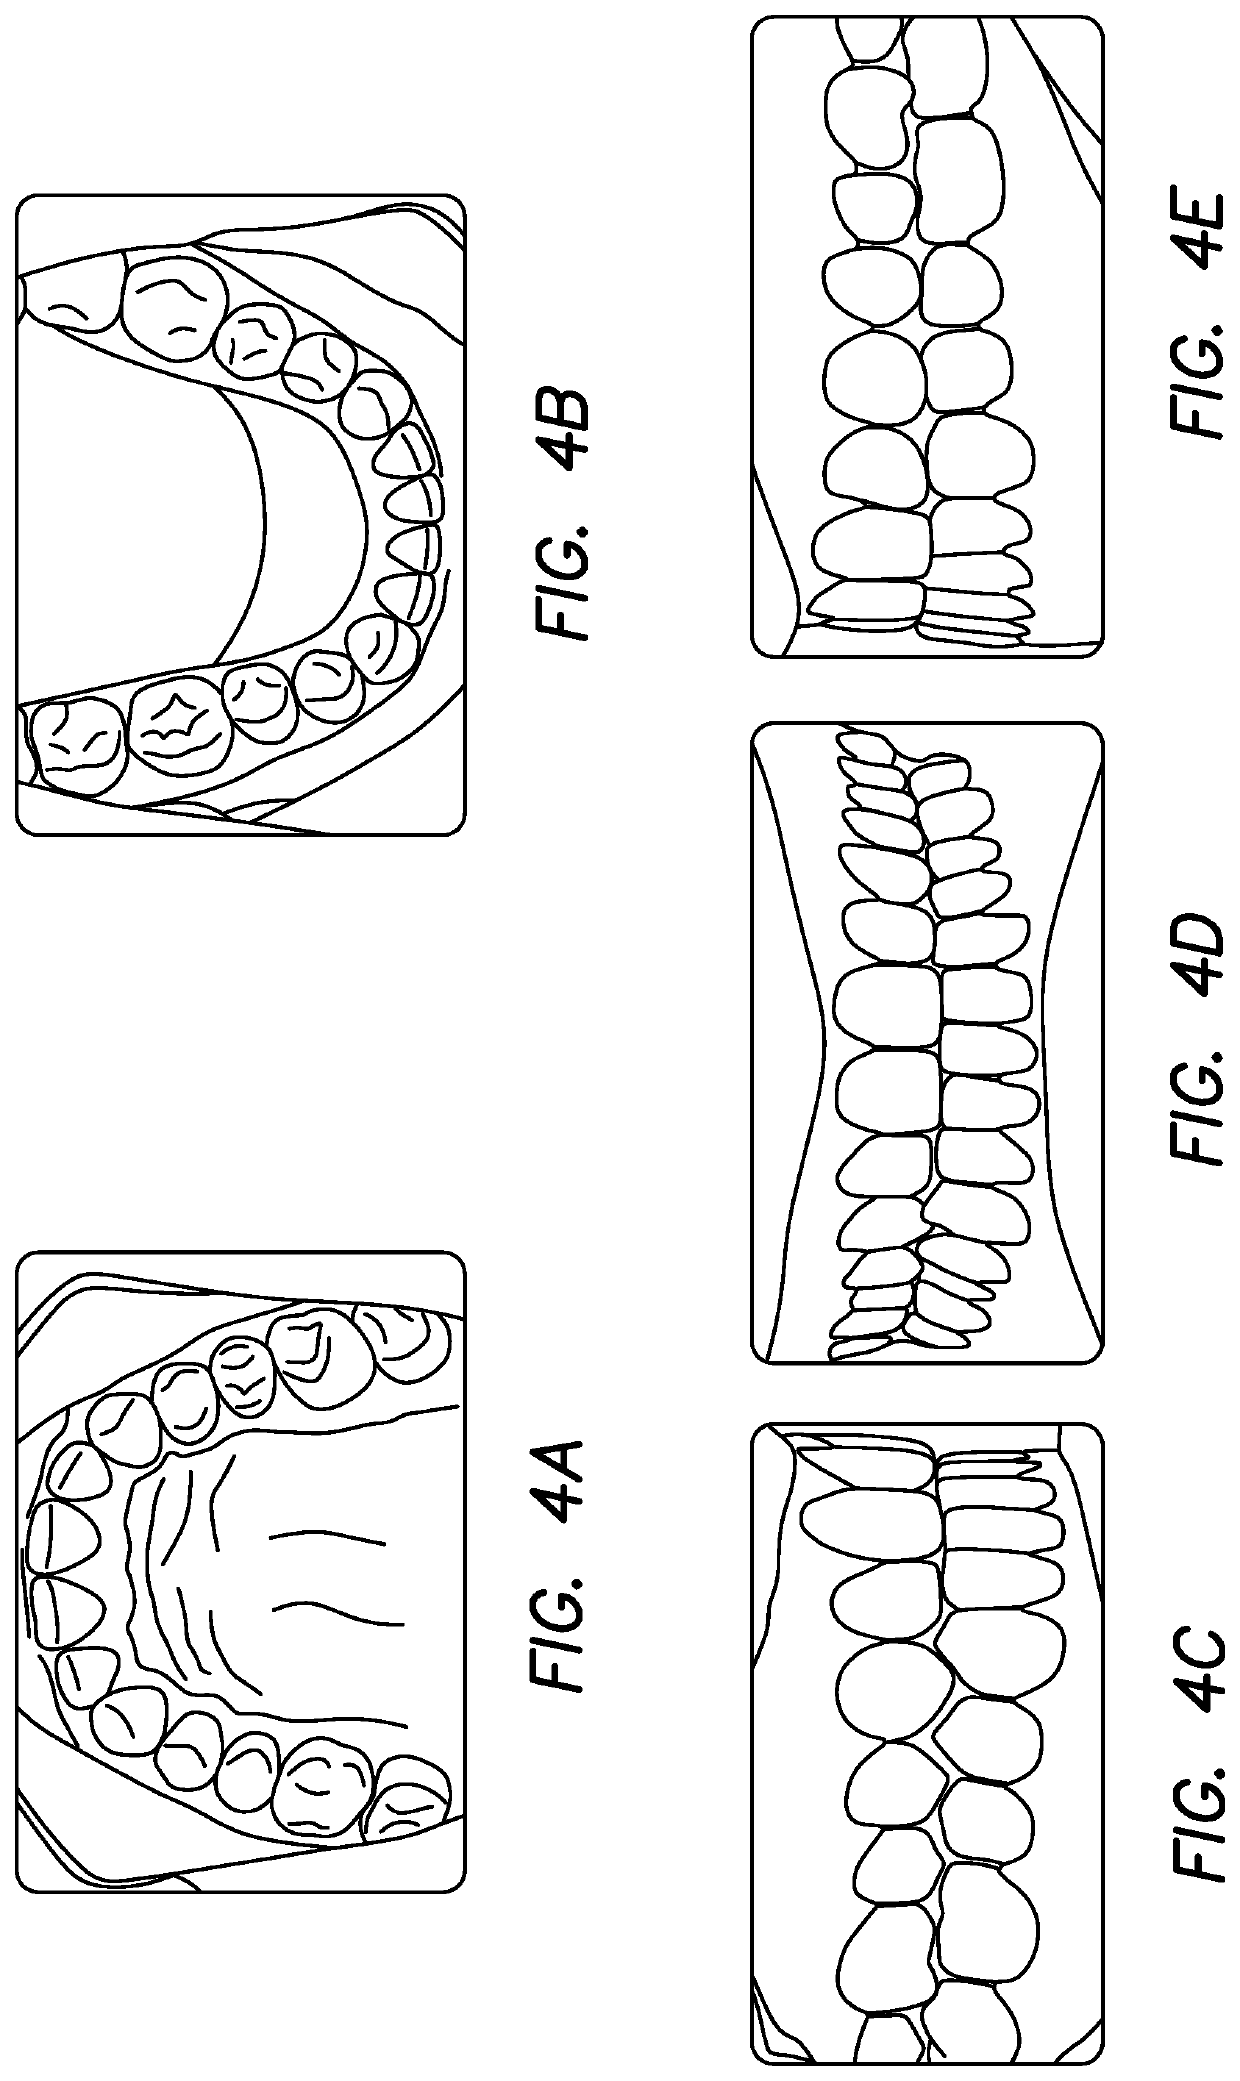 Orthodontic Appliance for Use During Orthognathic Surgery and Method for Using the Same